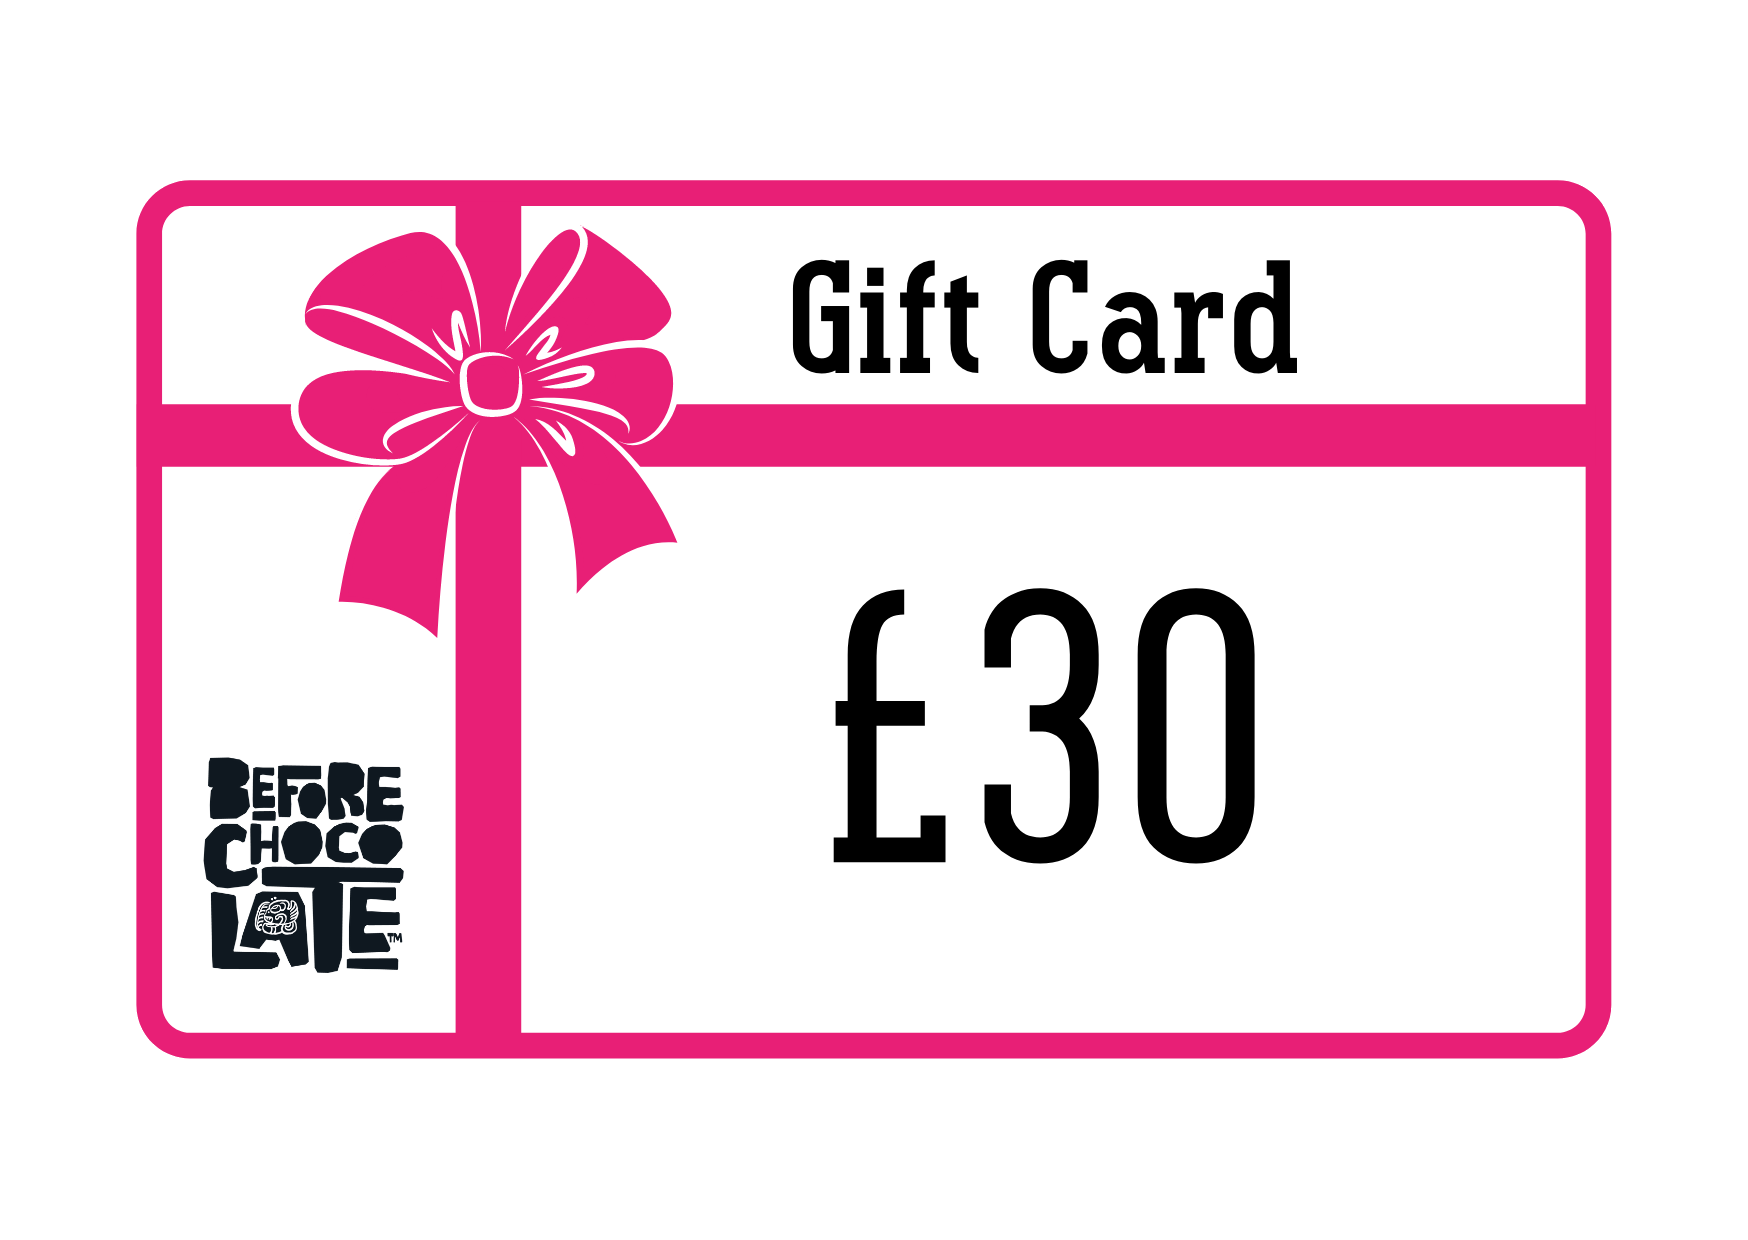 Before Chocolate Gift Card - £30